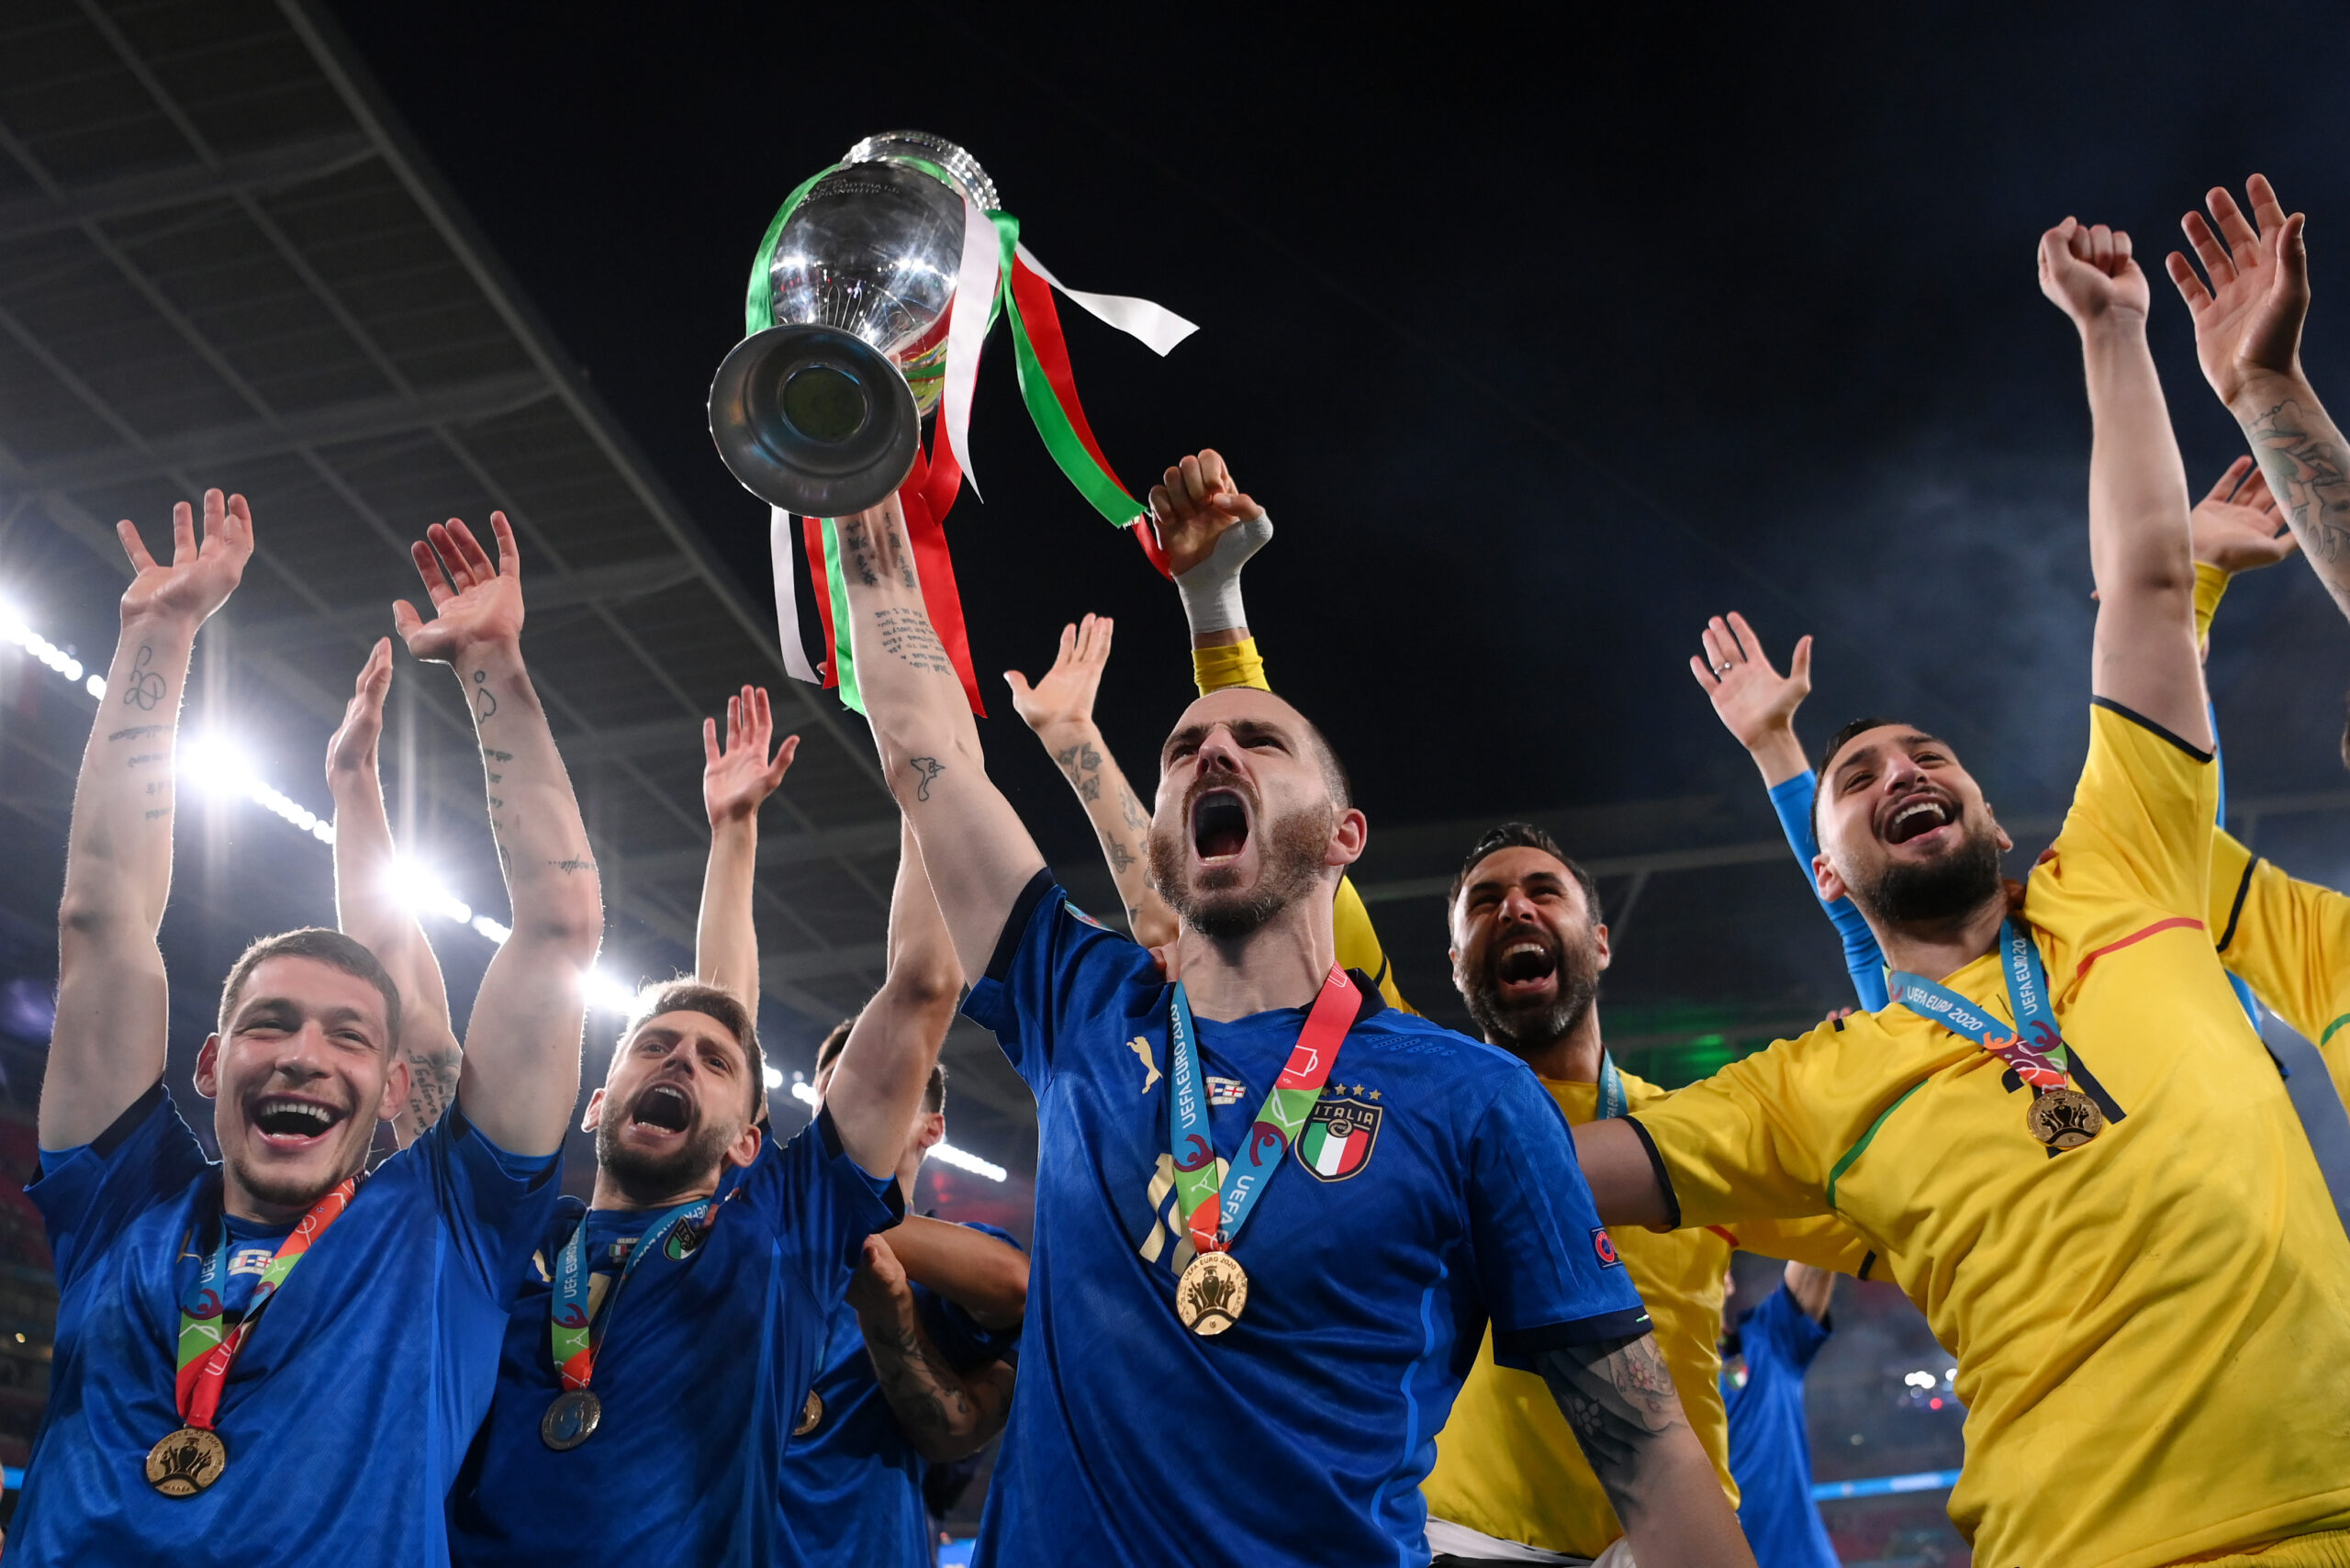 The result of every host nation at the UEFA European Championships